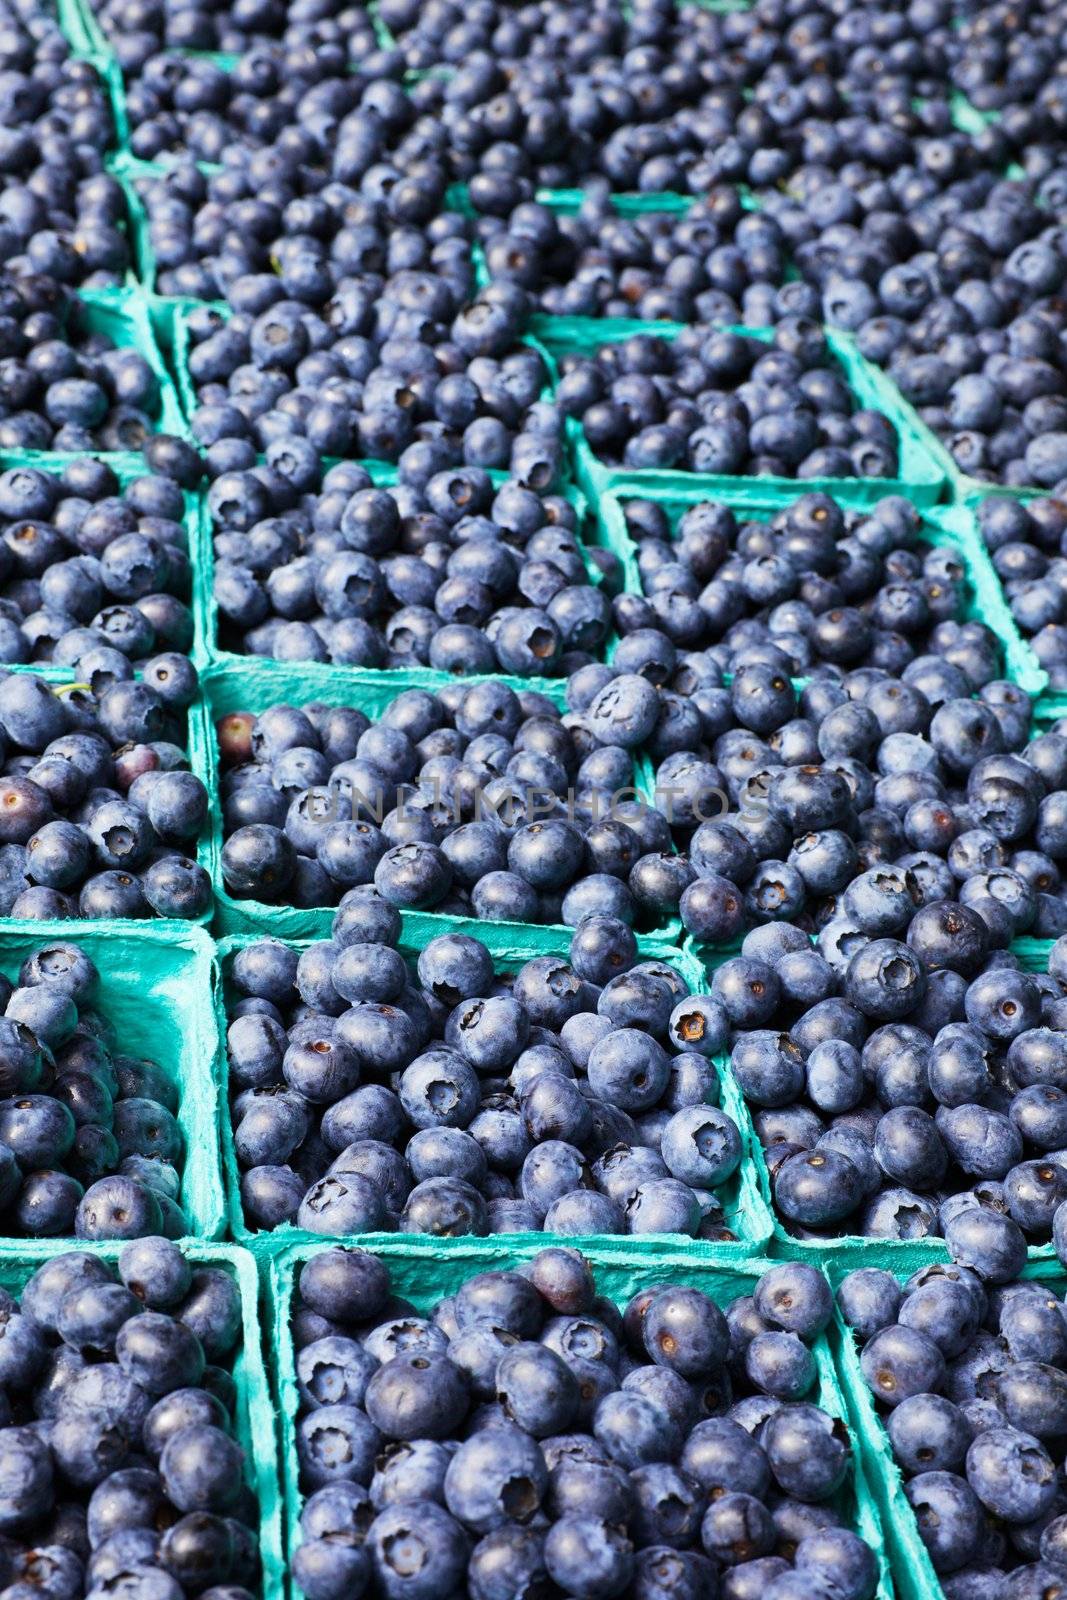 Many boxes of blueberries with soft background at the Farmers Market